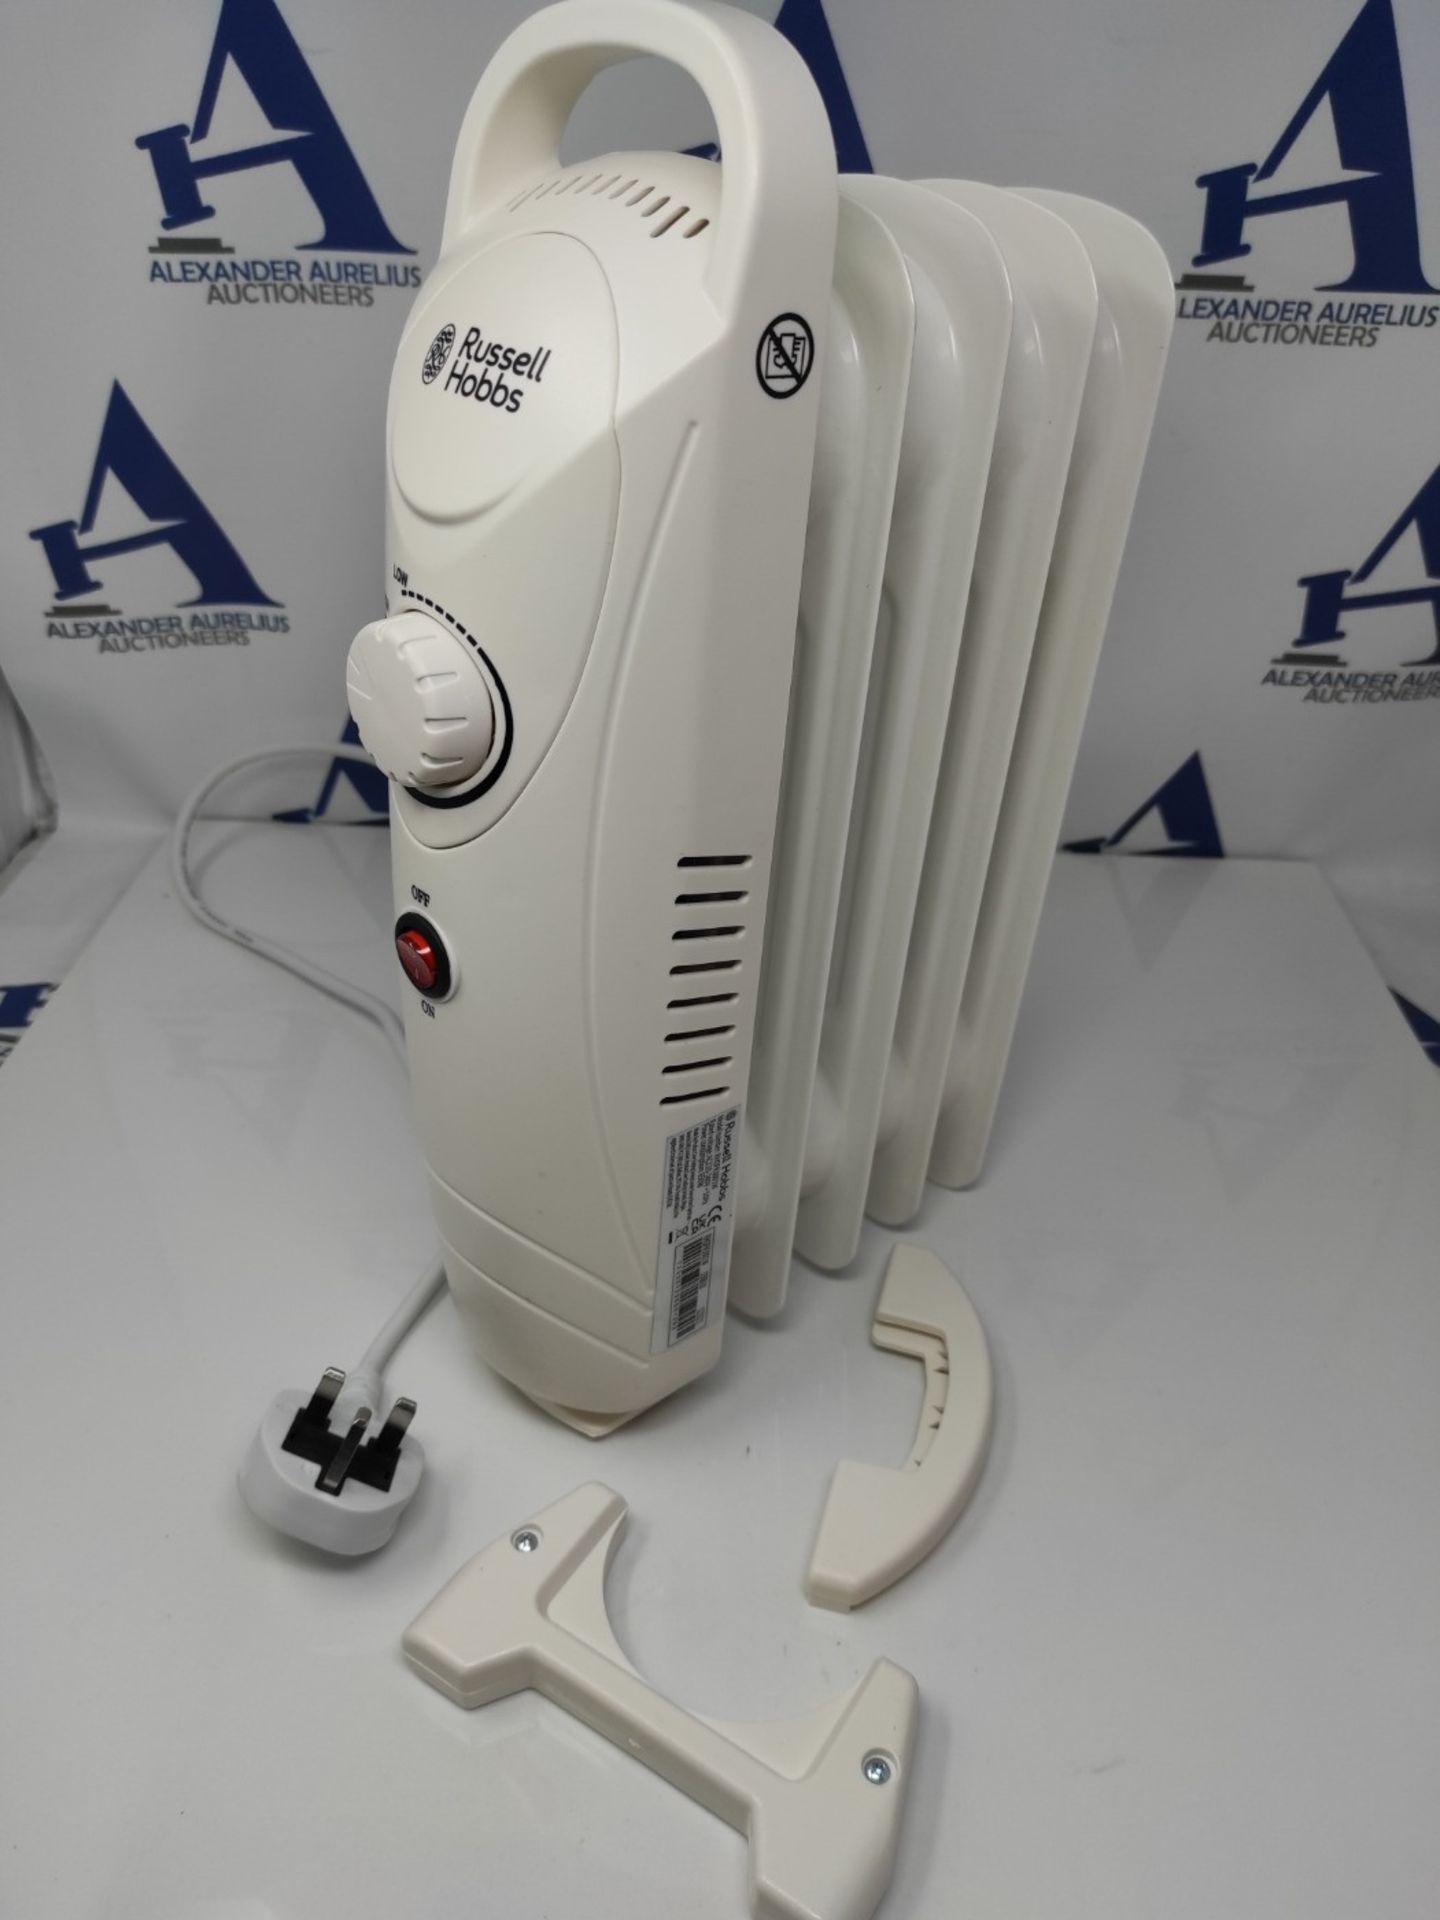 Russell Hobbs 650W Oil Filled Radiator, 5 Fin Portable Electric Heater - White, Adjust - Image 2 of 3